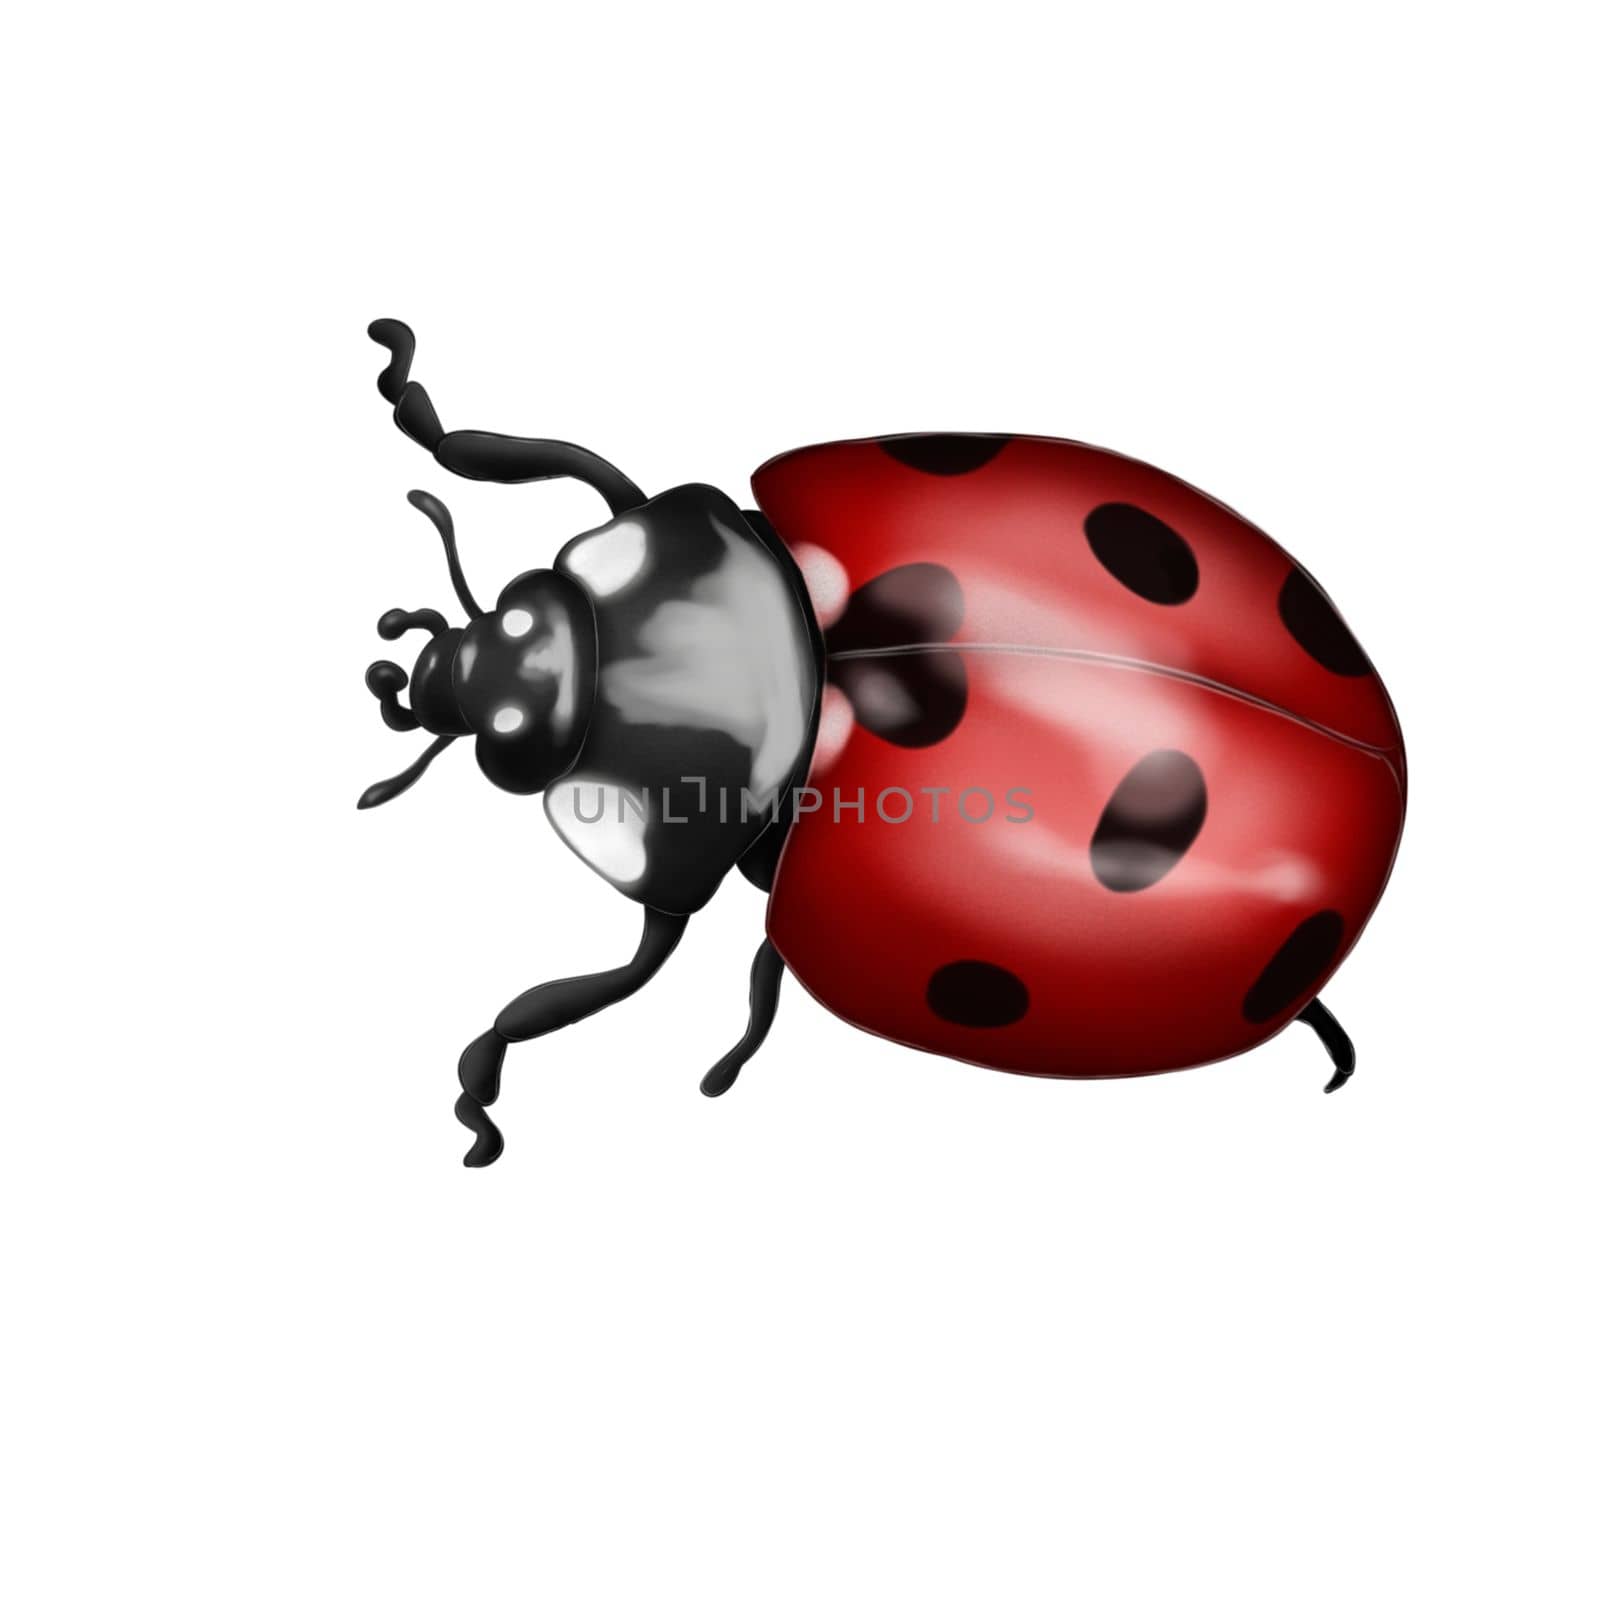 Illustration of a ladybug insect on an isolated background. Bright and beautiful . print, illustration